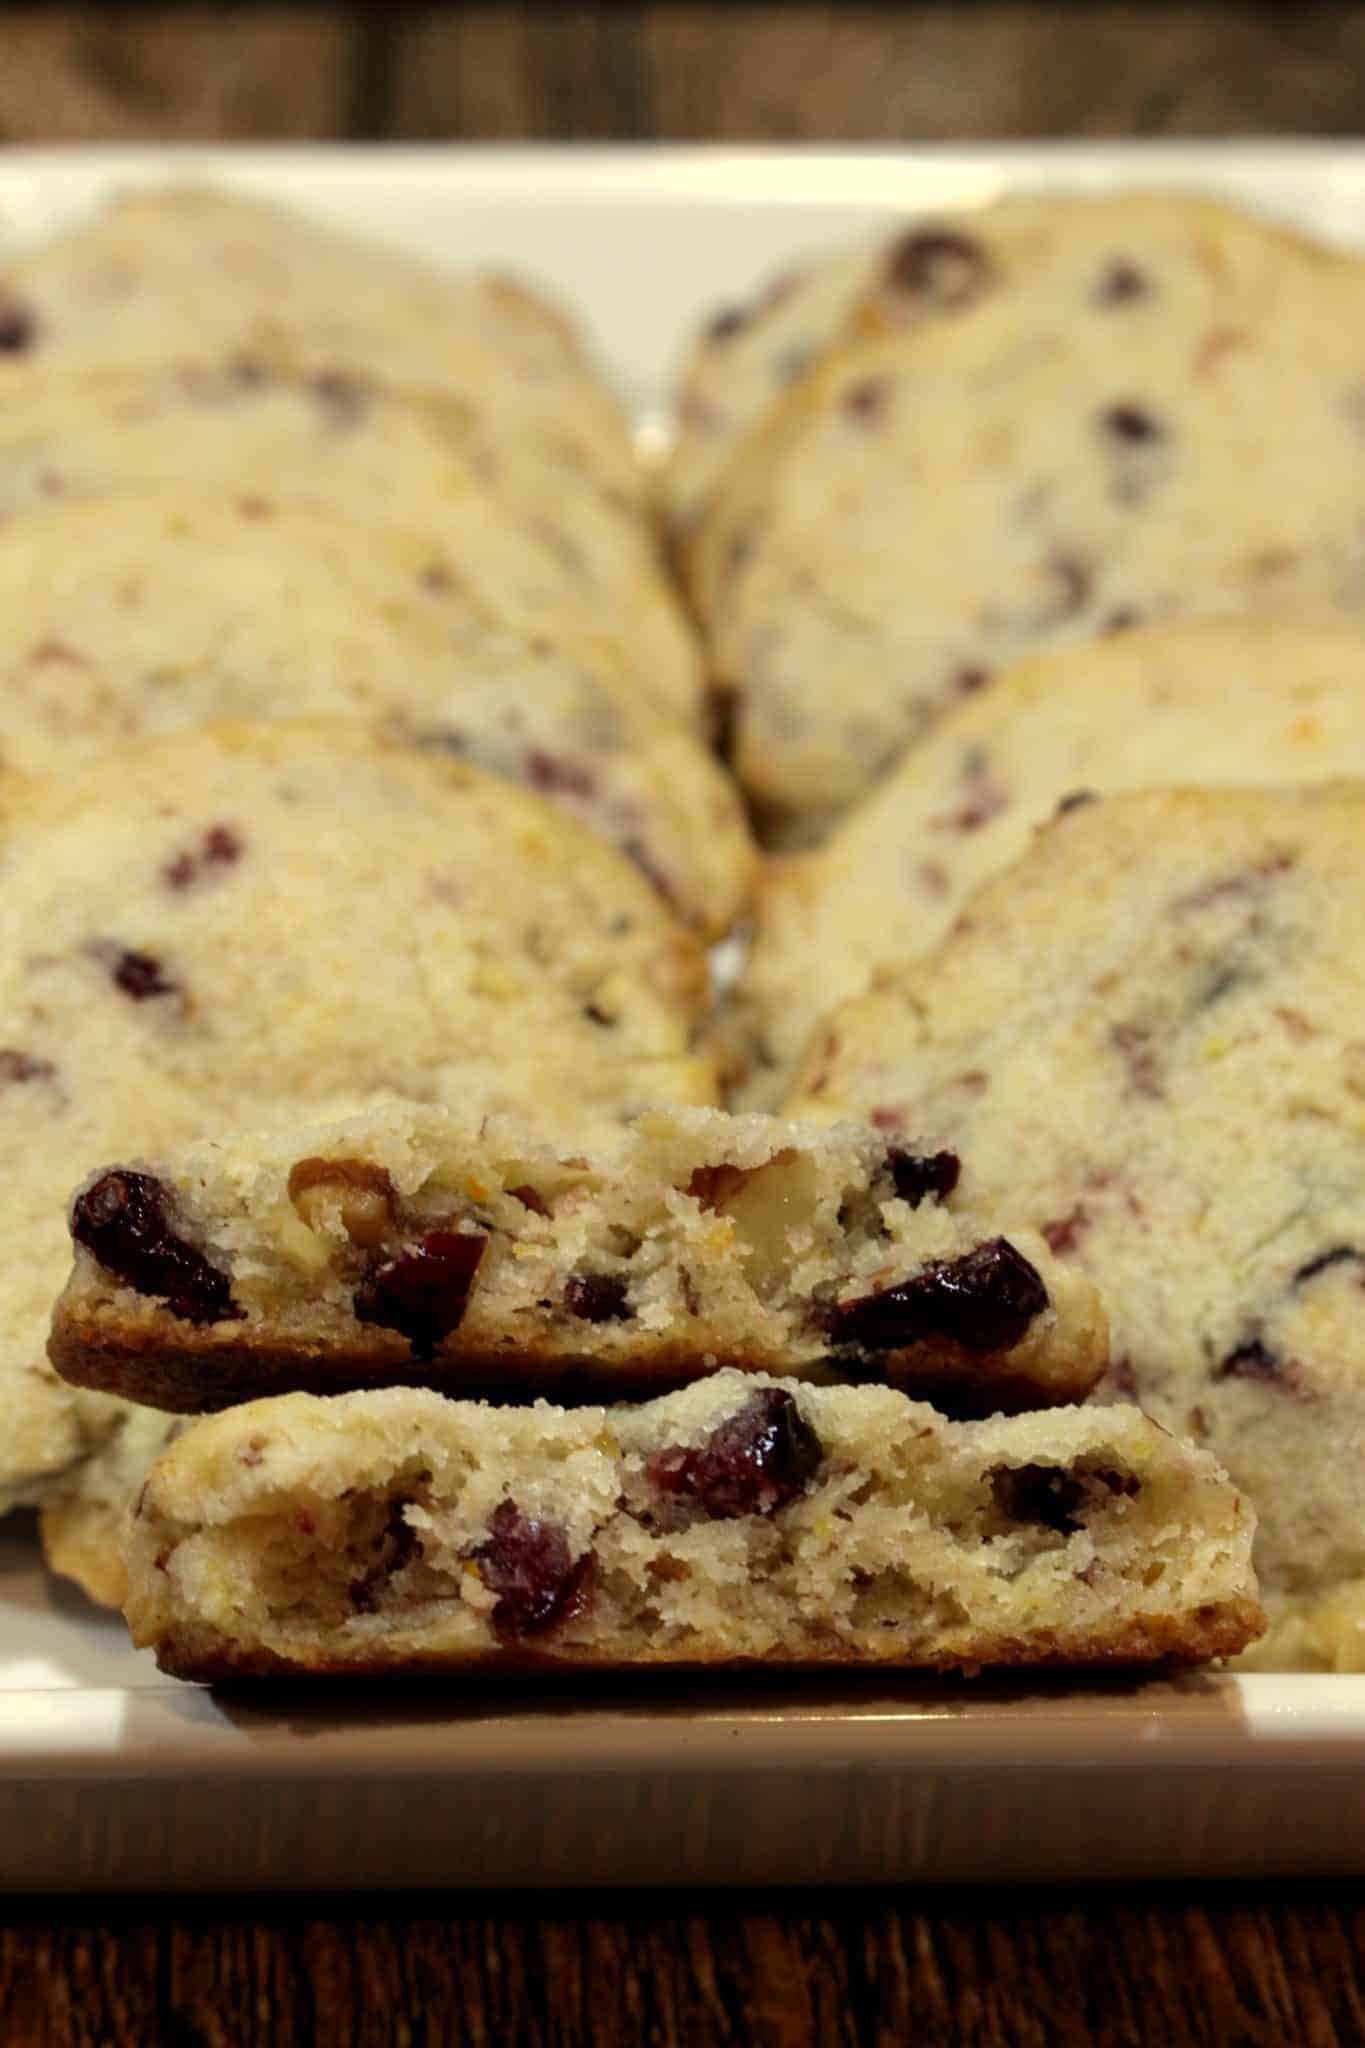 Cranberry Walnut Cookies - Cut and side view for texture